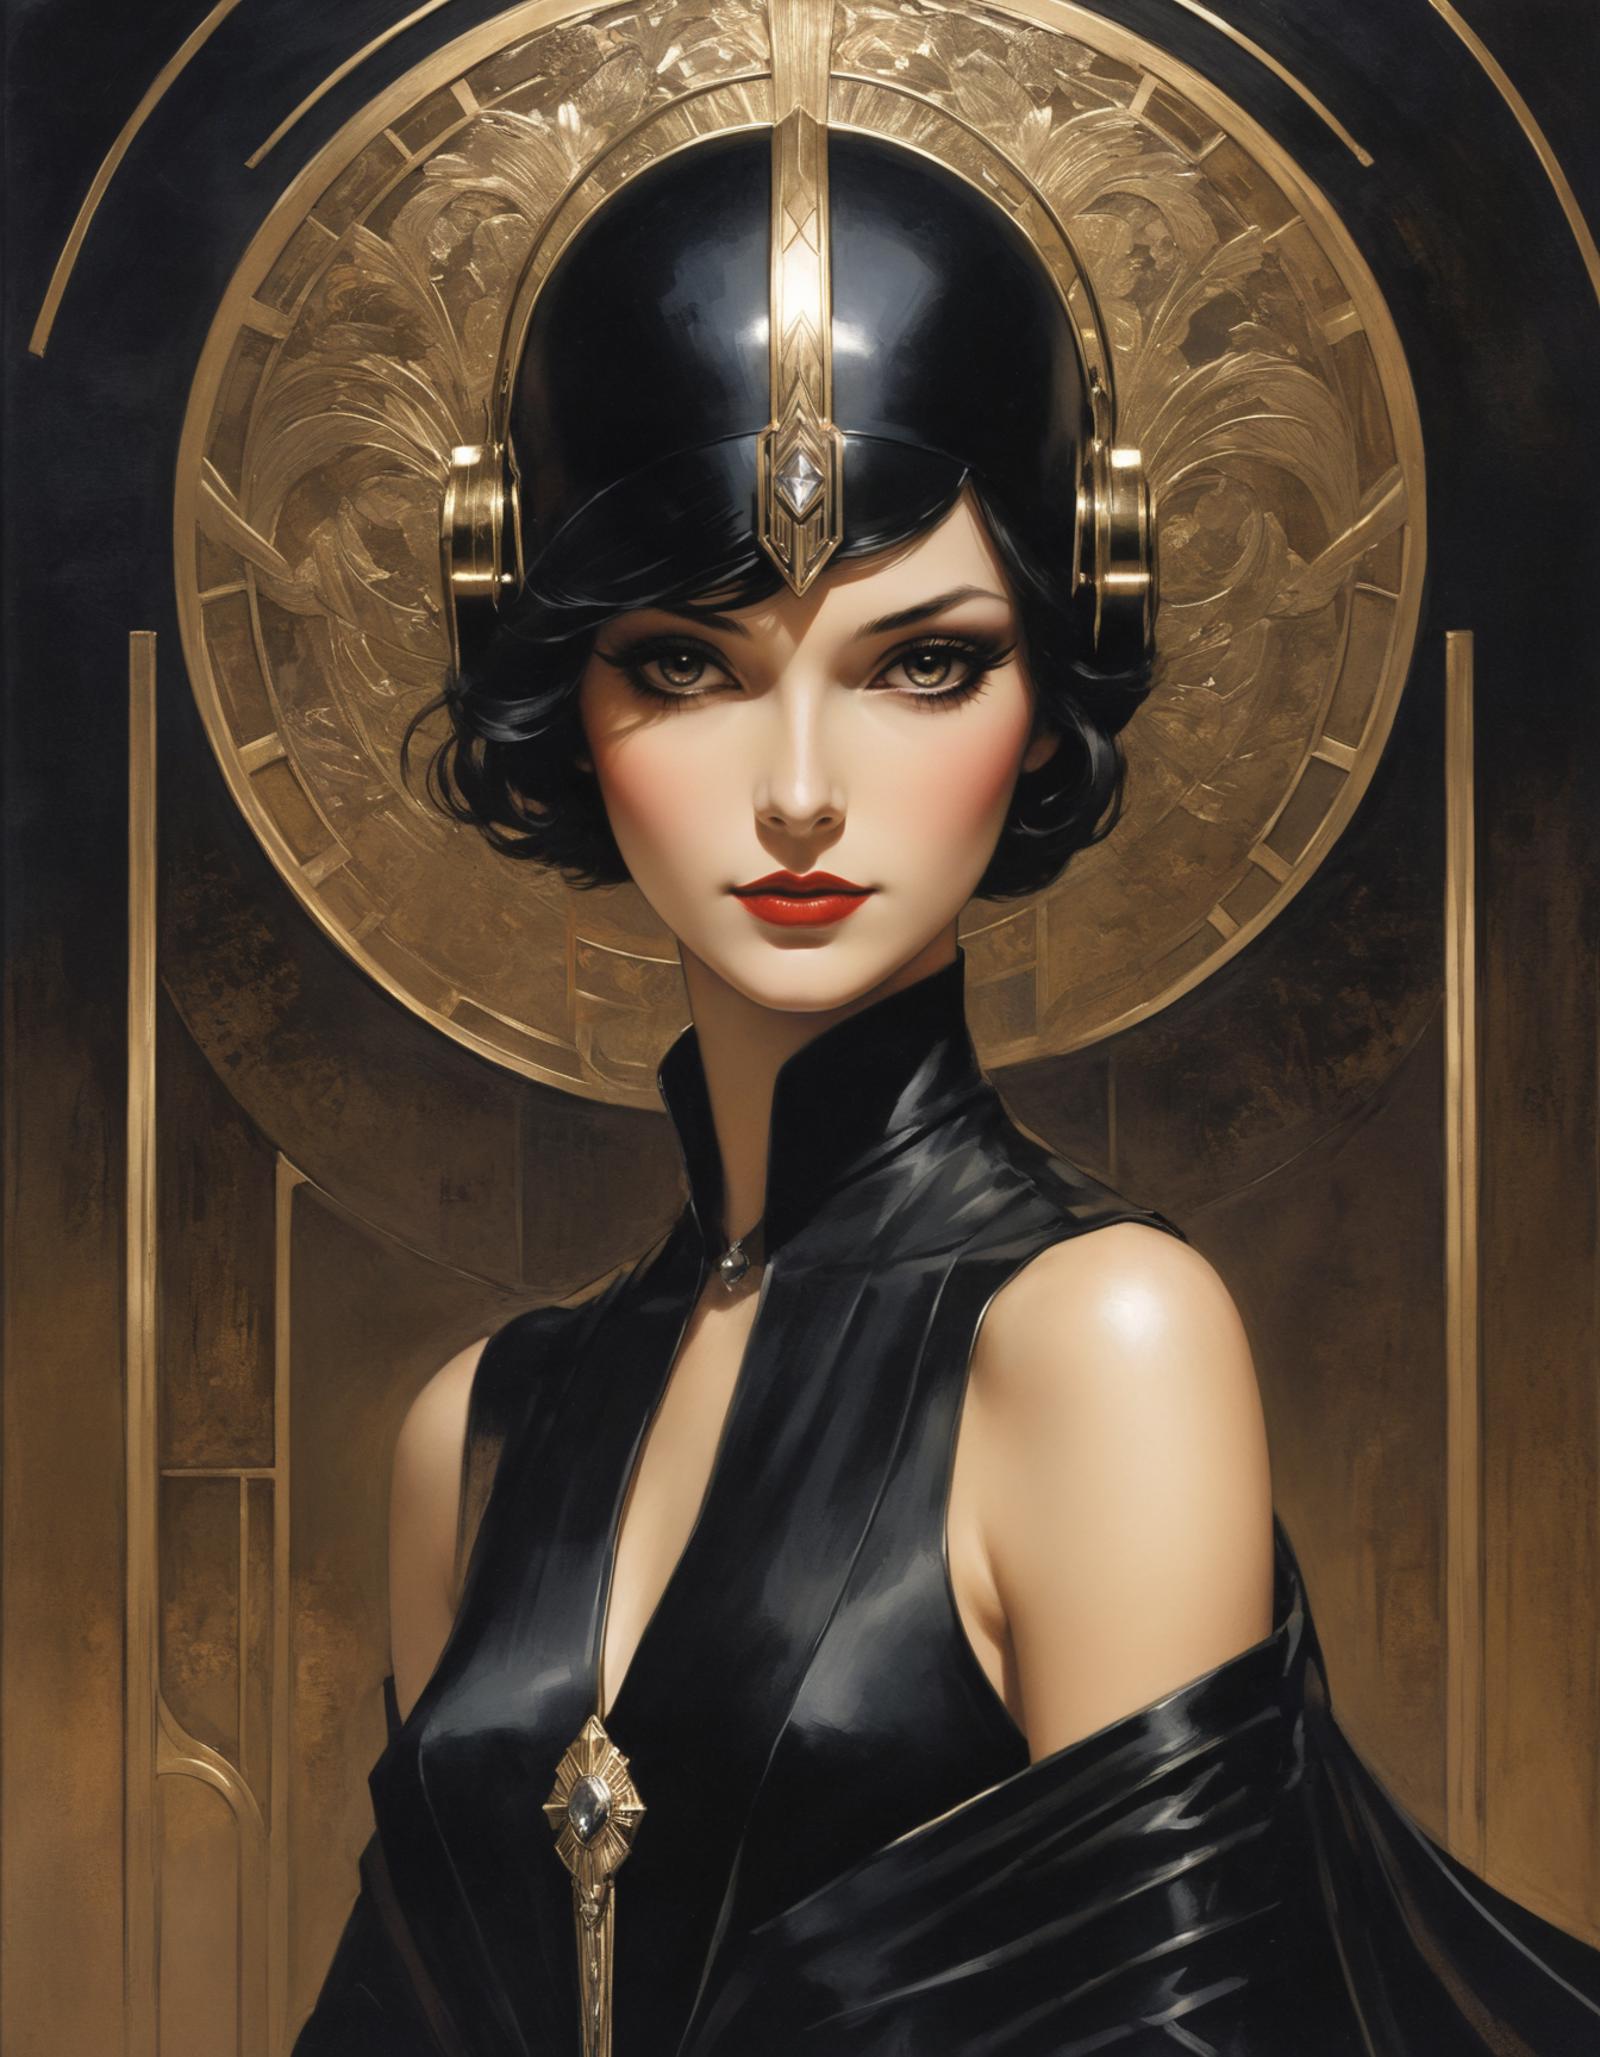 Artistic Portrait of a Woman in a Black Dress with Gold Accessories.